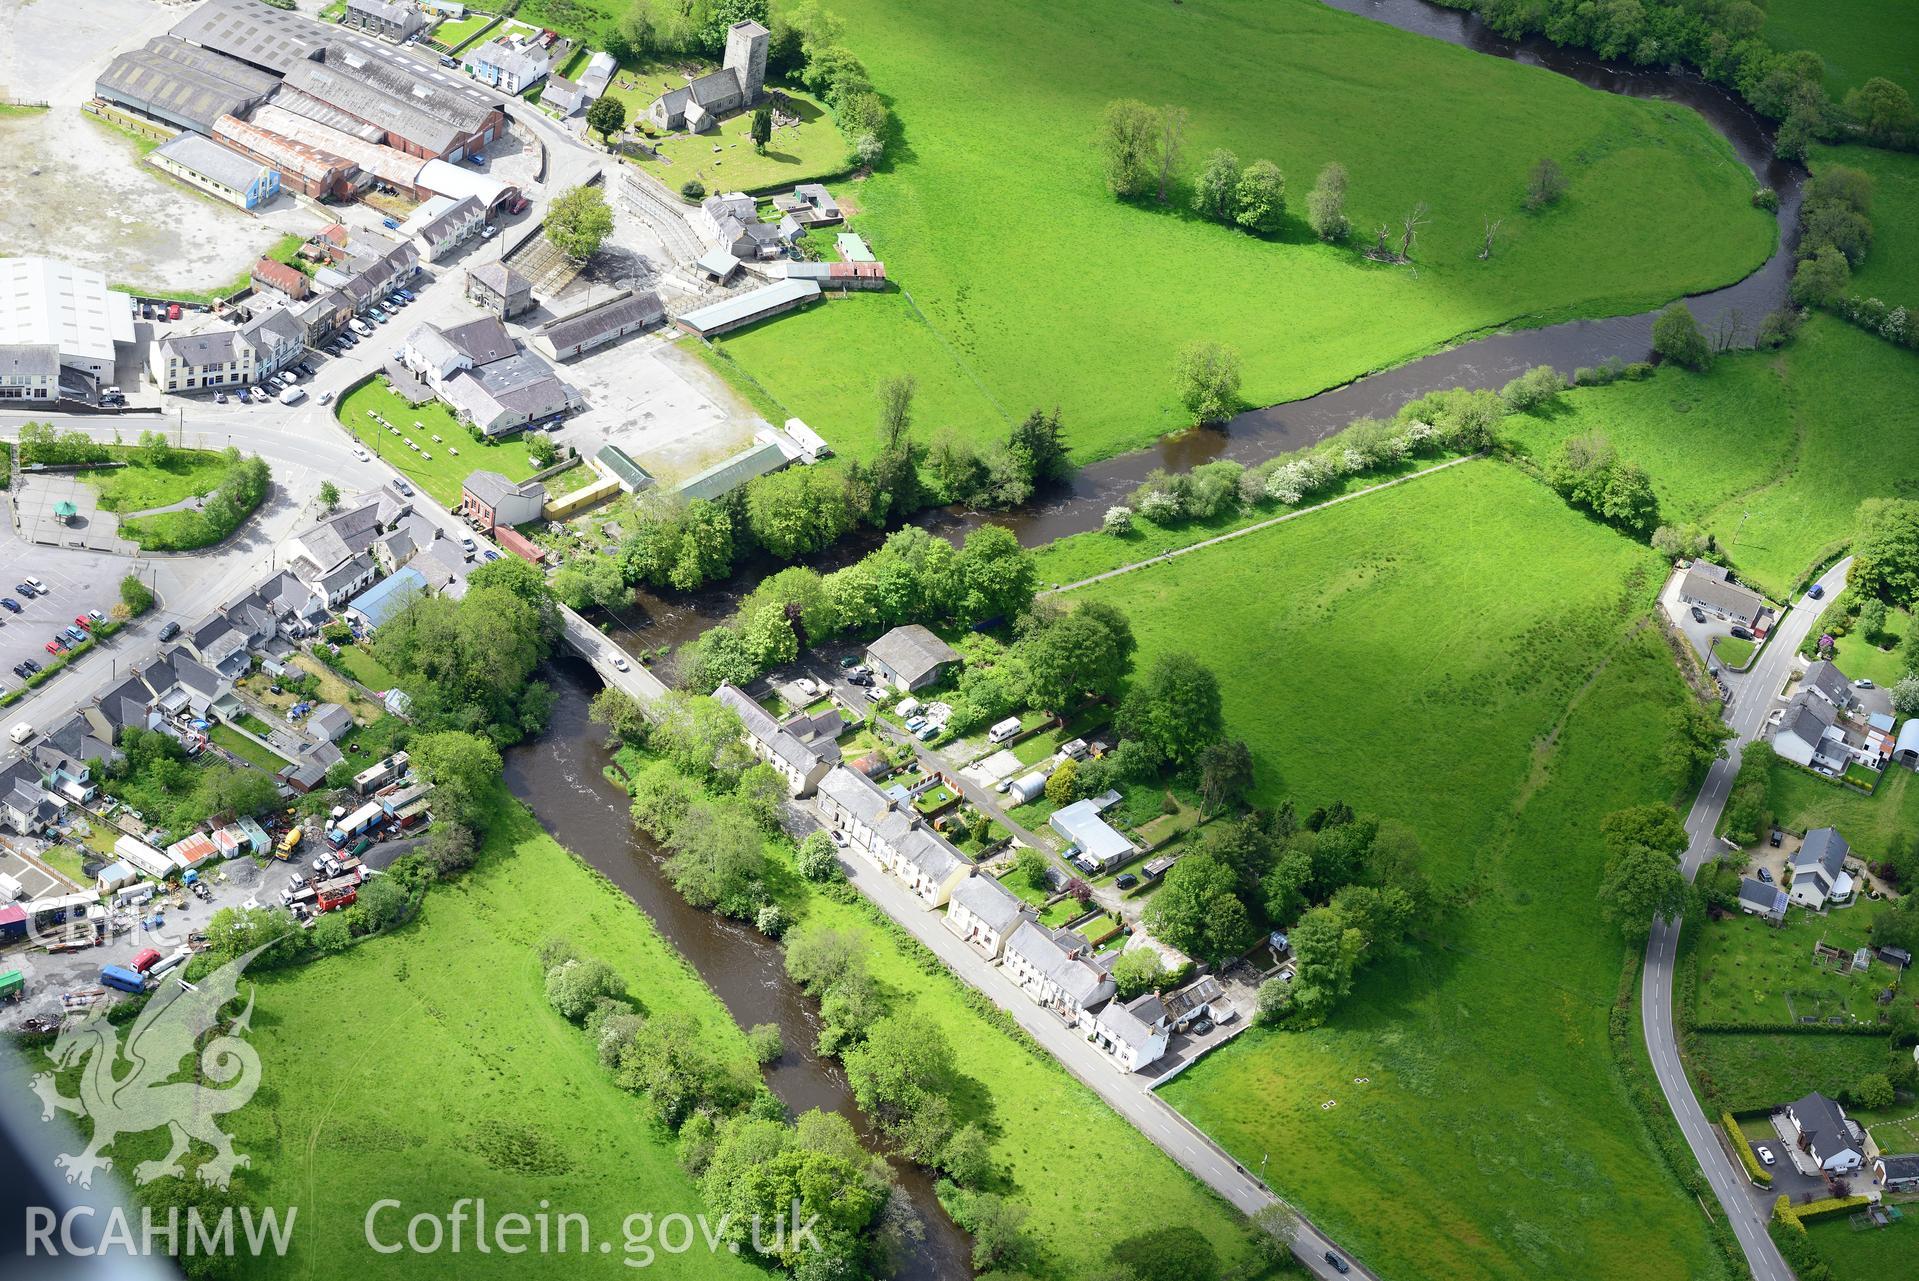 St. Peter's Church, Llanybydder Bridge and Llanybydder Livestock Market, Llanybydder. Oblique aerial photograph taken during the Royal Commission's programme of archaeological aerial reconnaissance by Toby Driver on 3rd June 2015.